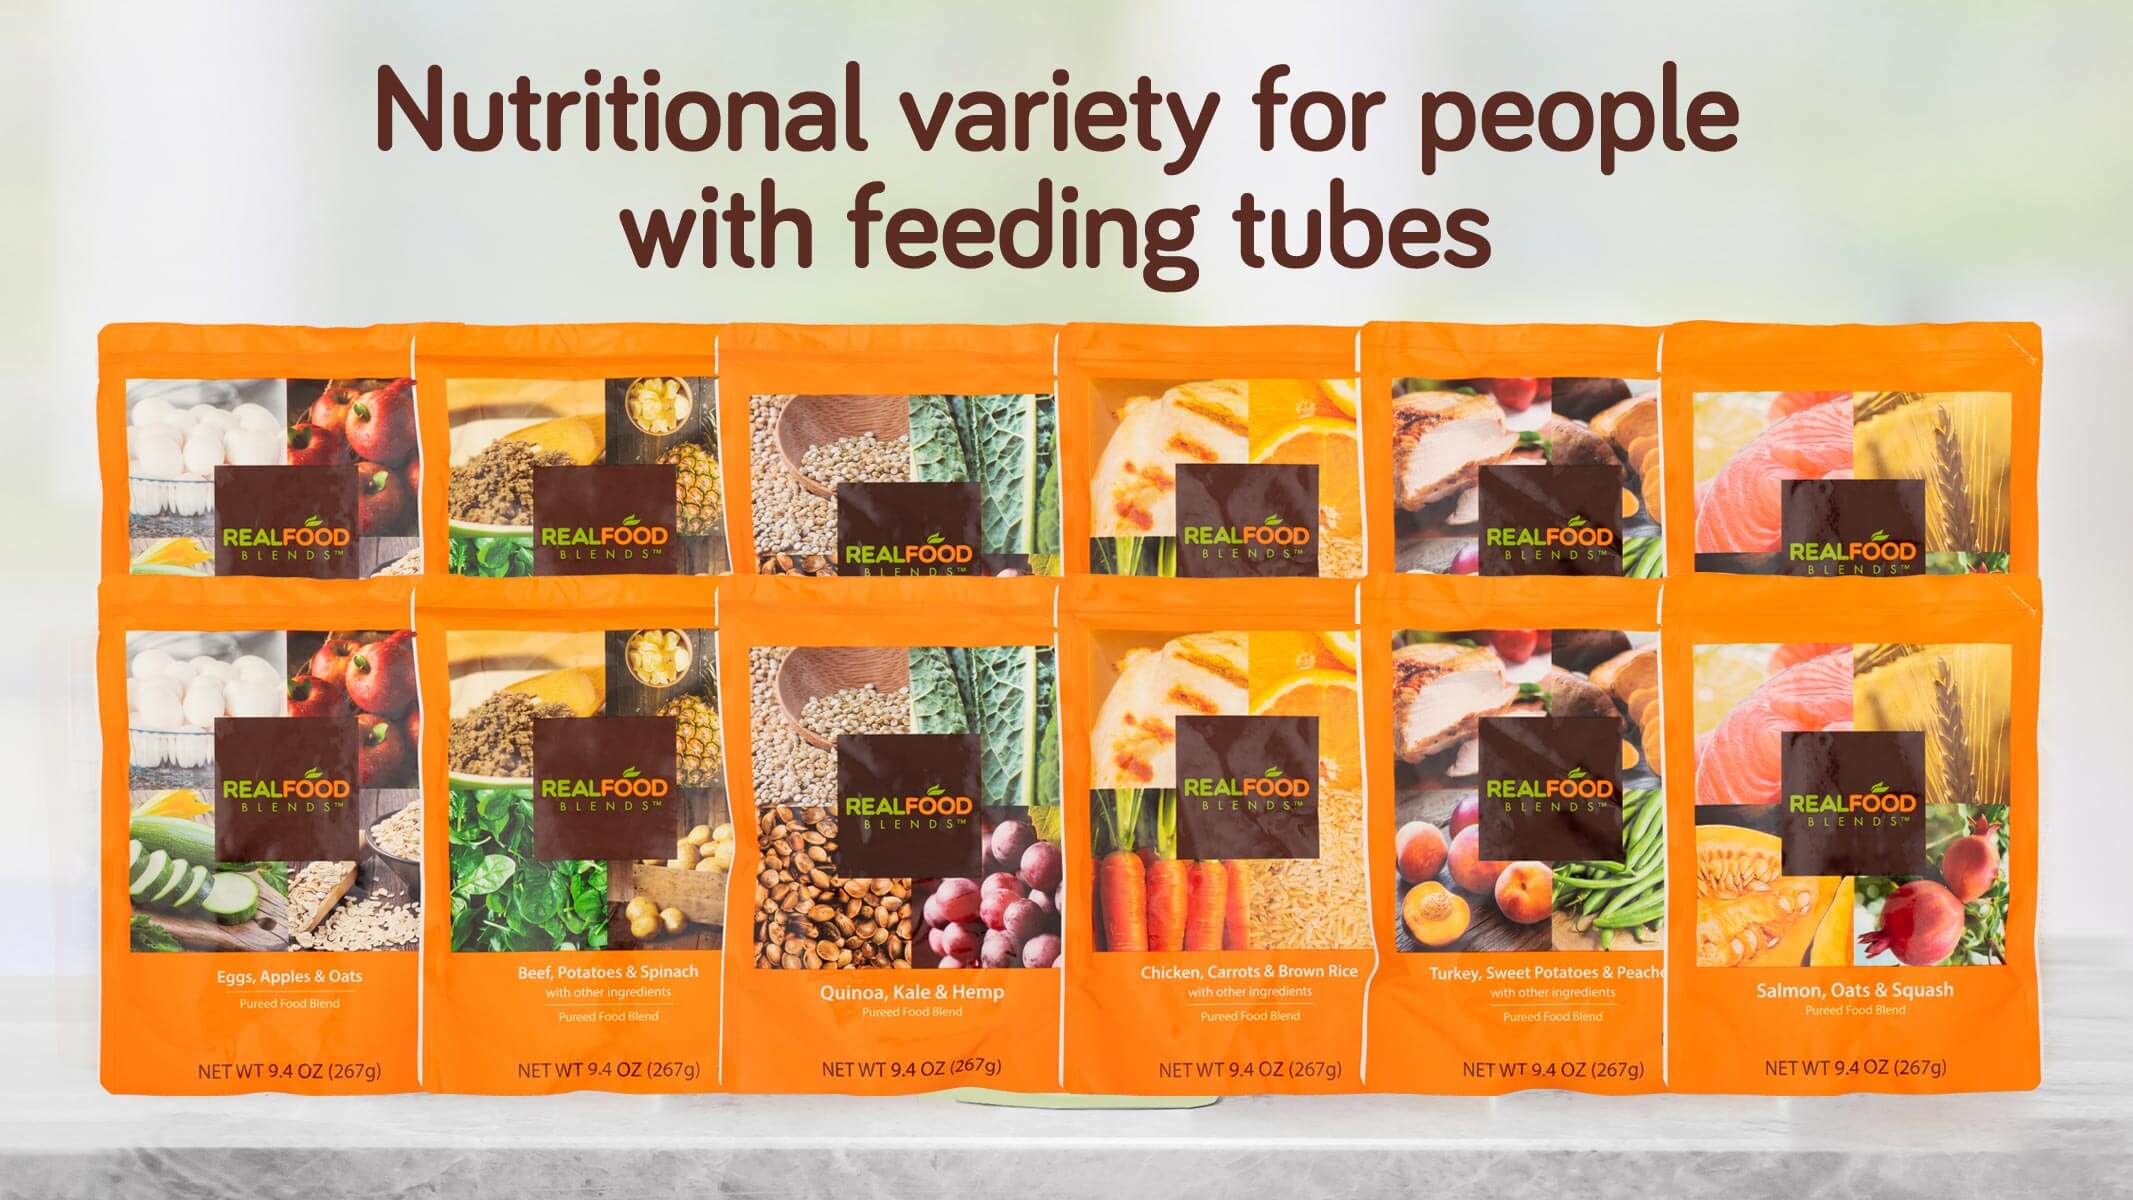 Real Food Blends Variety Pack Pureed Food Blend for Tube Feeding, 9.4-ounce Pouch